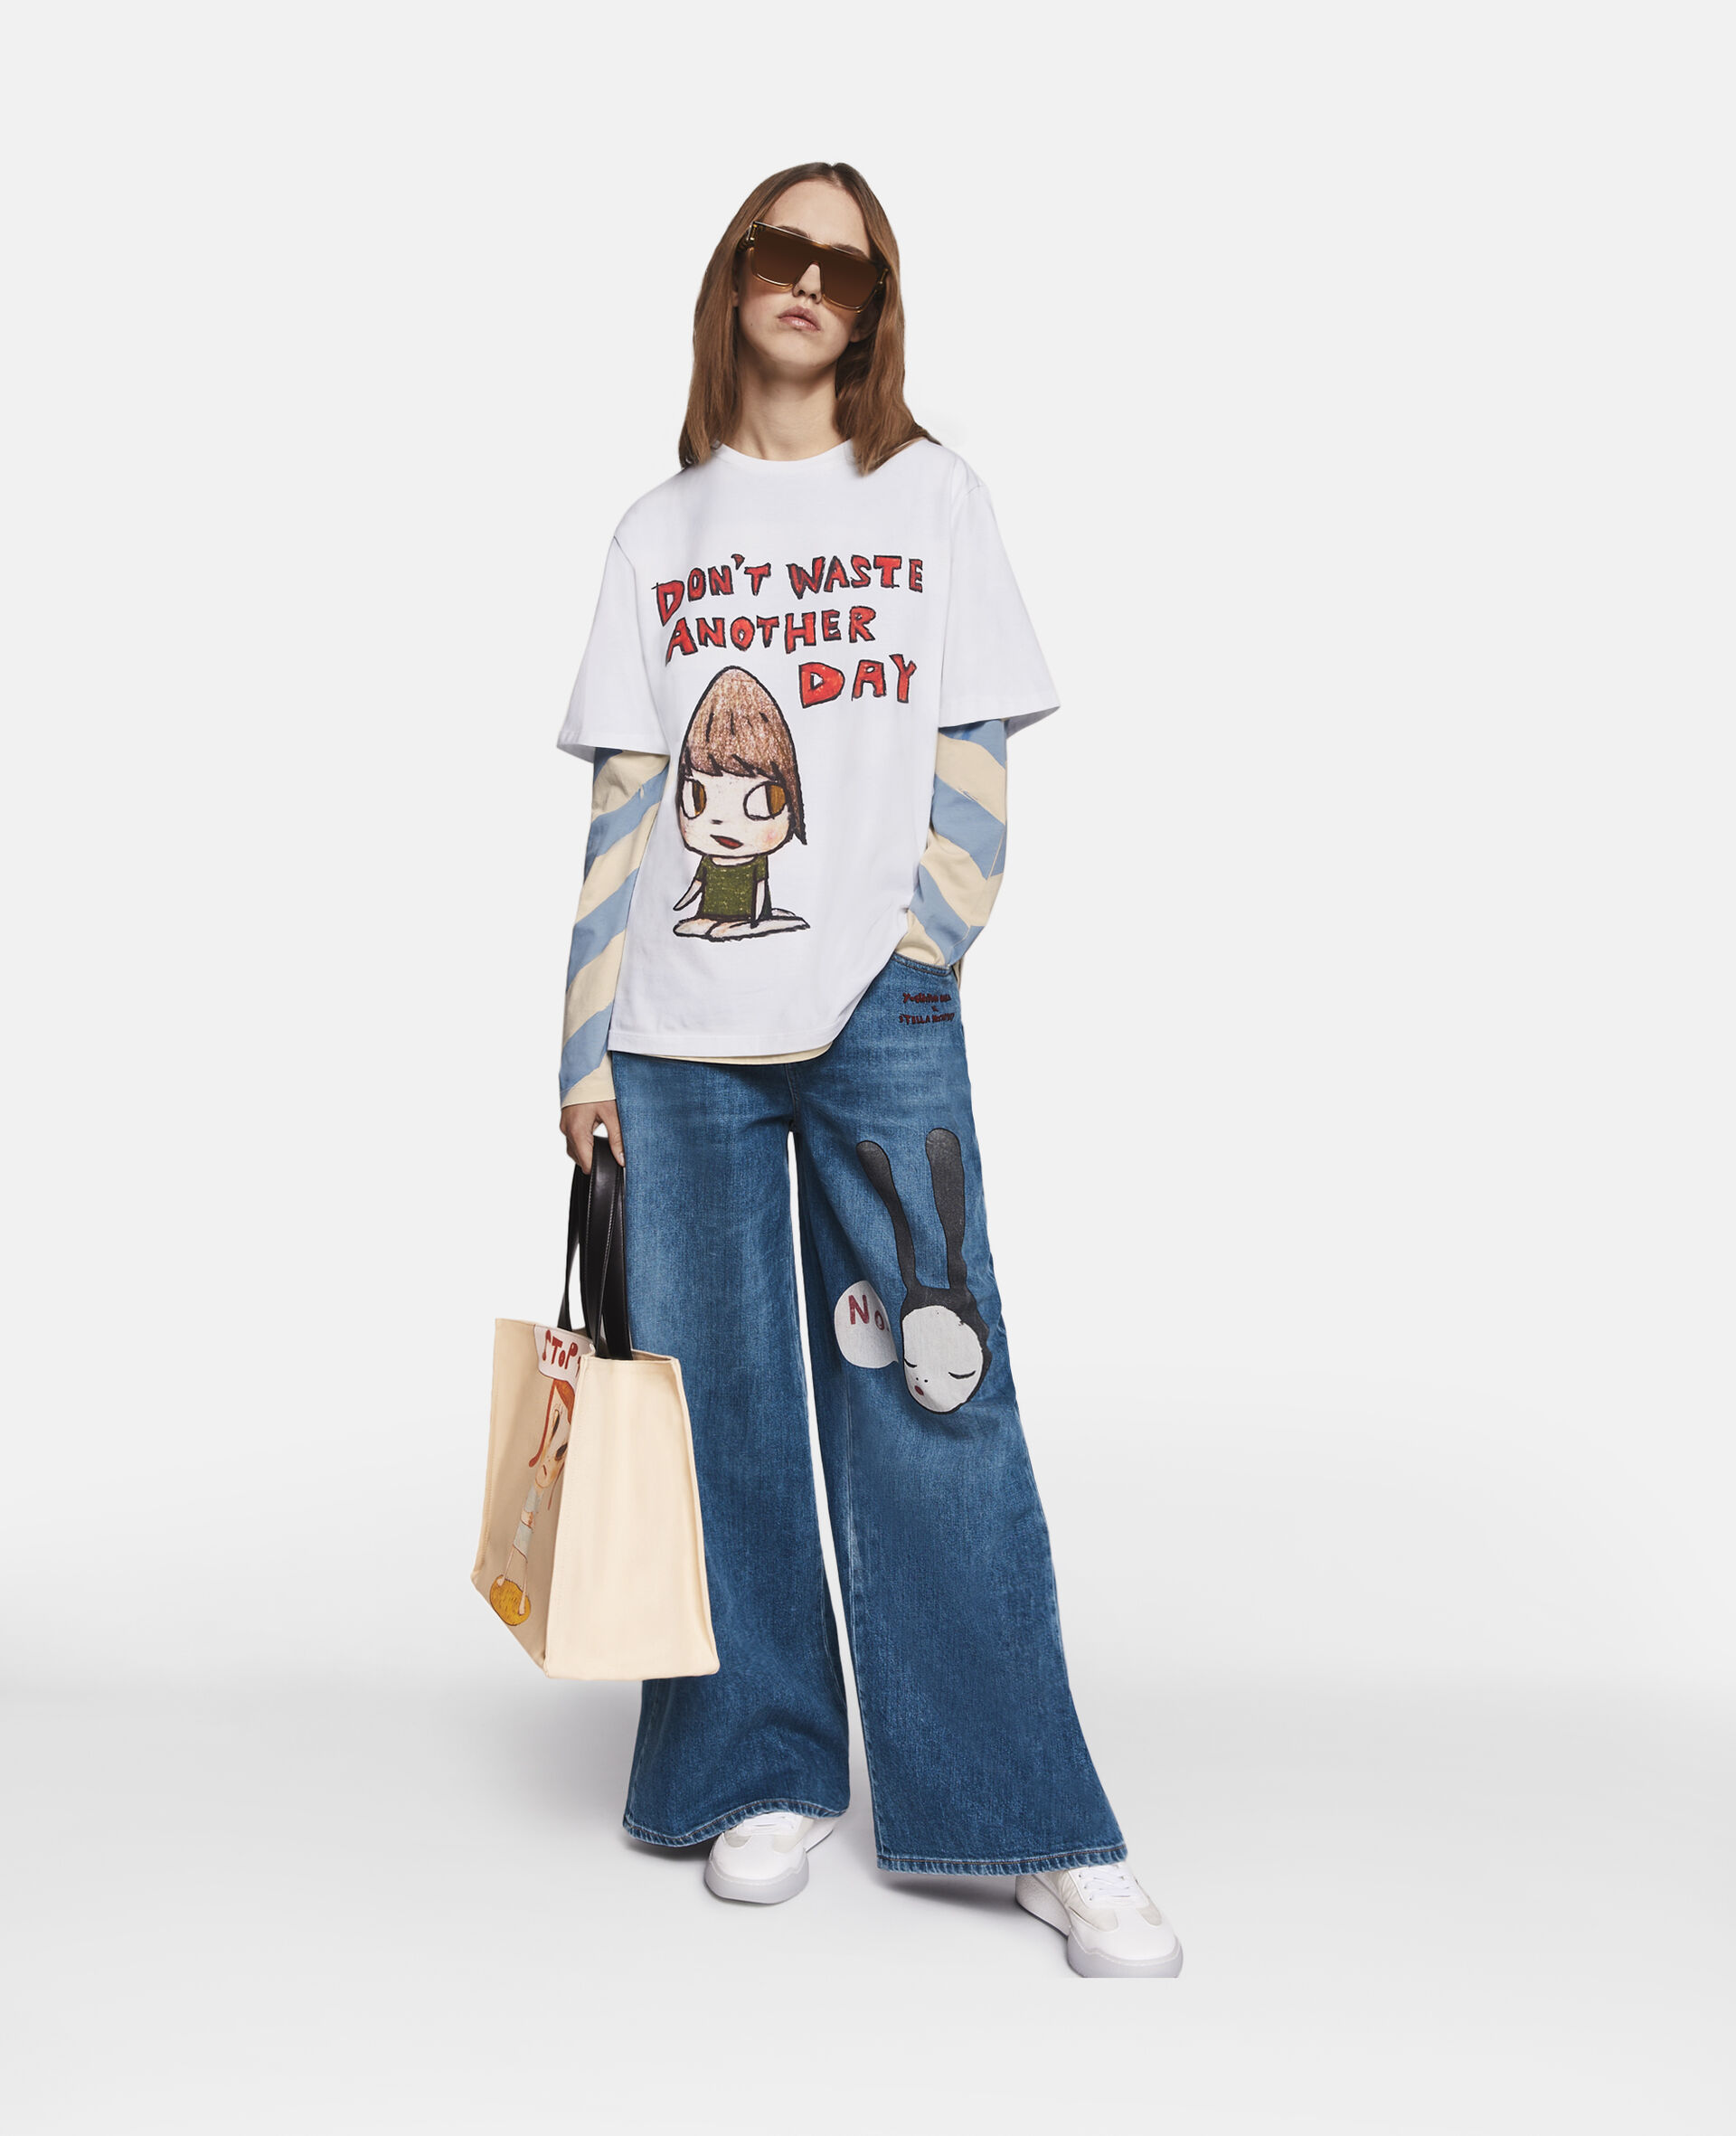 Don't Waste Another Day Slogan Oversized T-Shirt-White-large image number 3